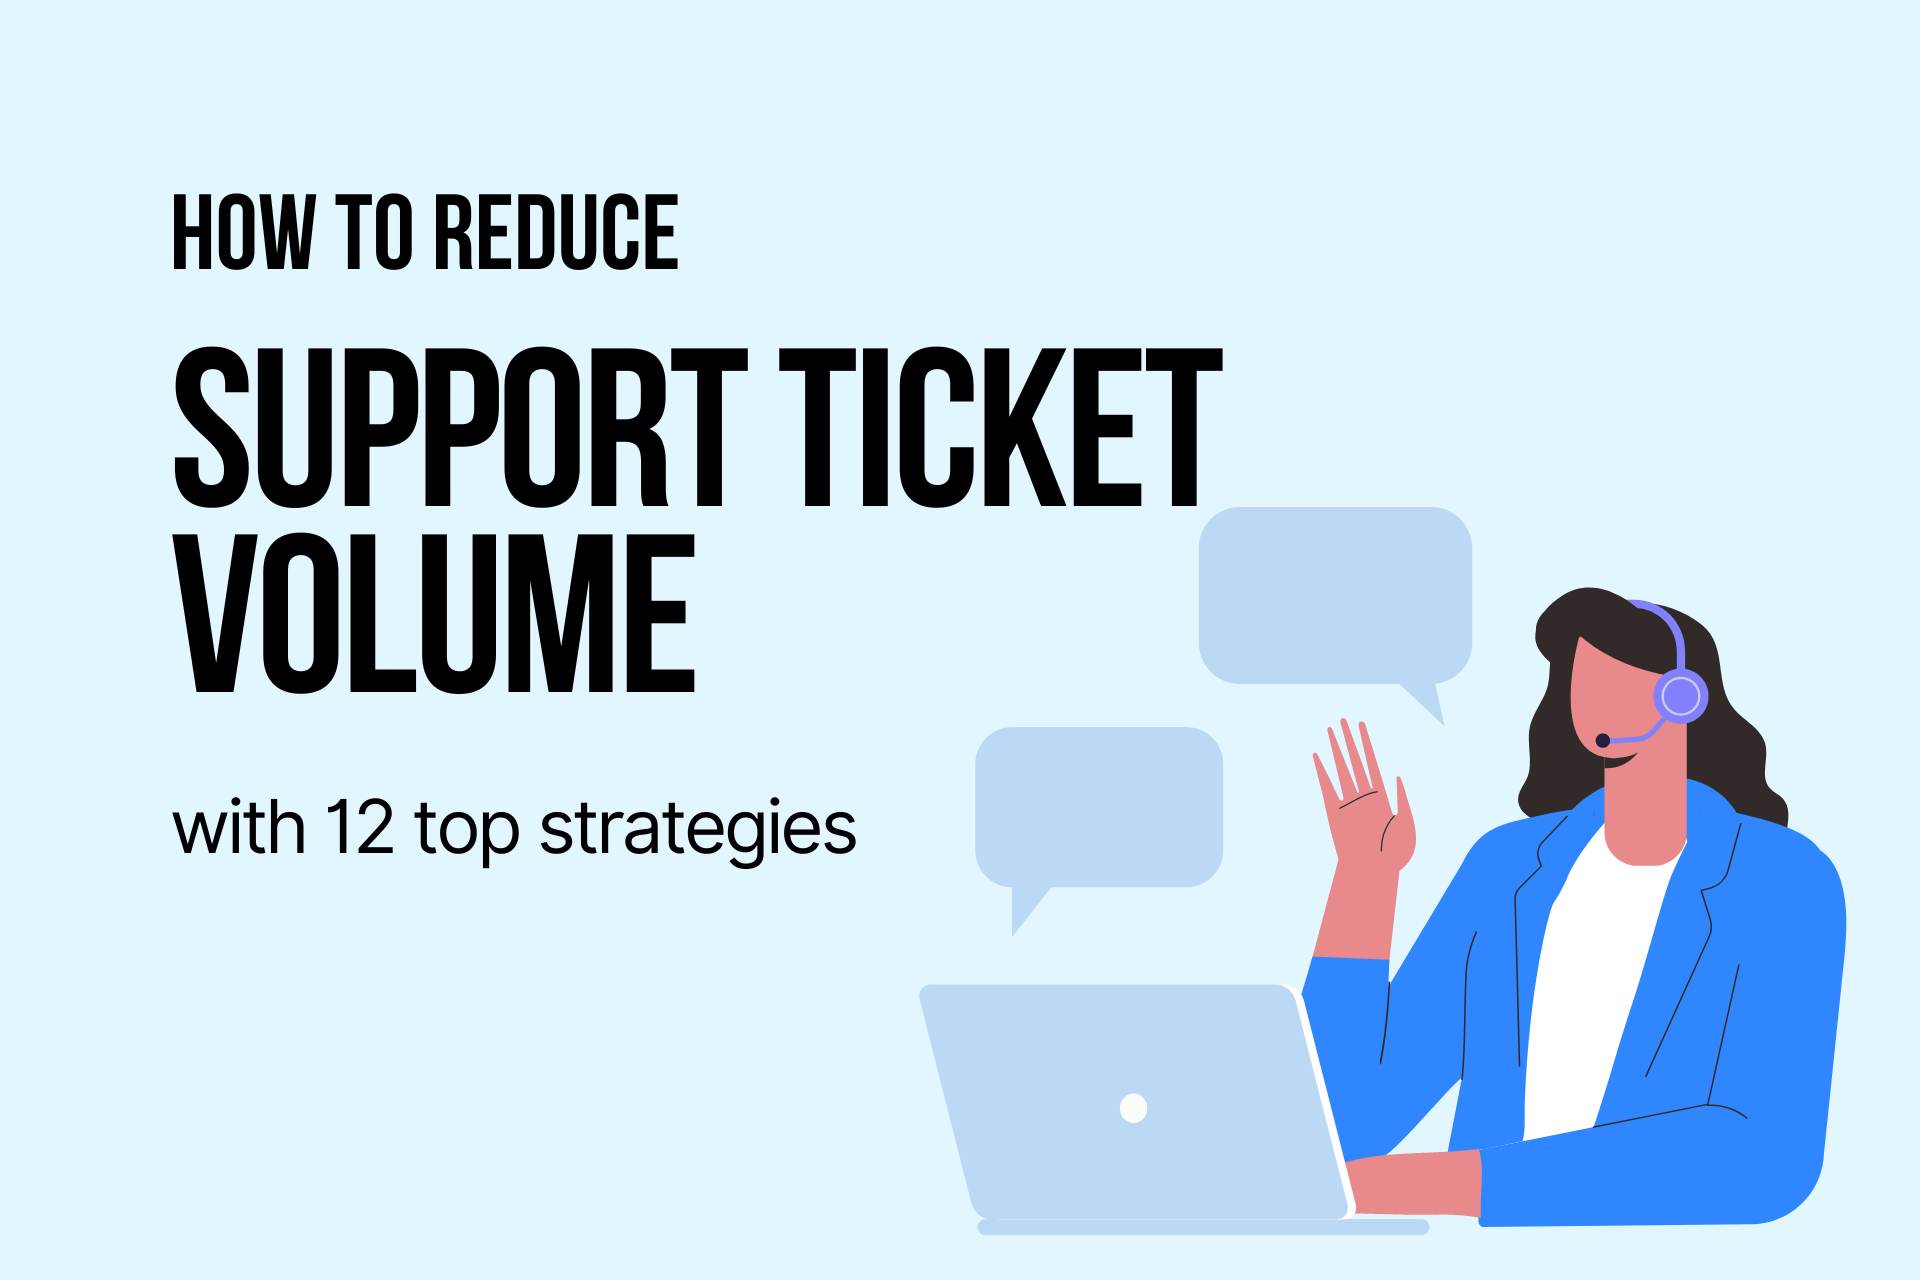 How to Reduce Support Ticket Volume with 12 Top Strategies